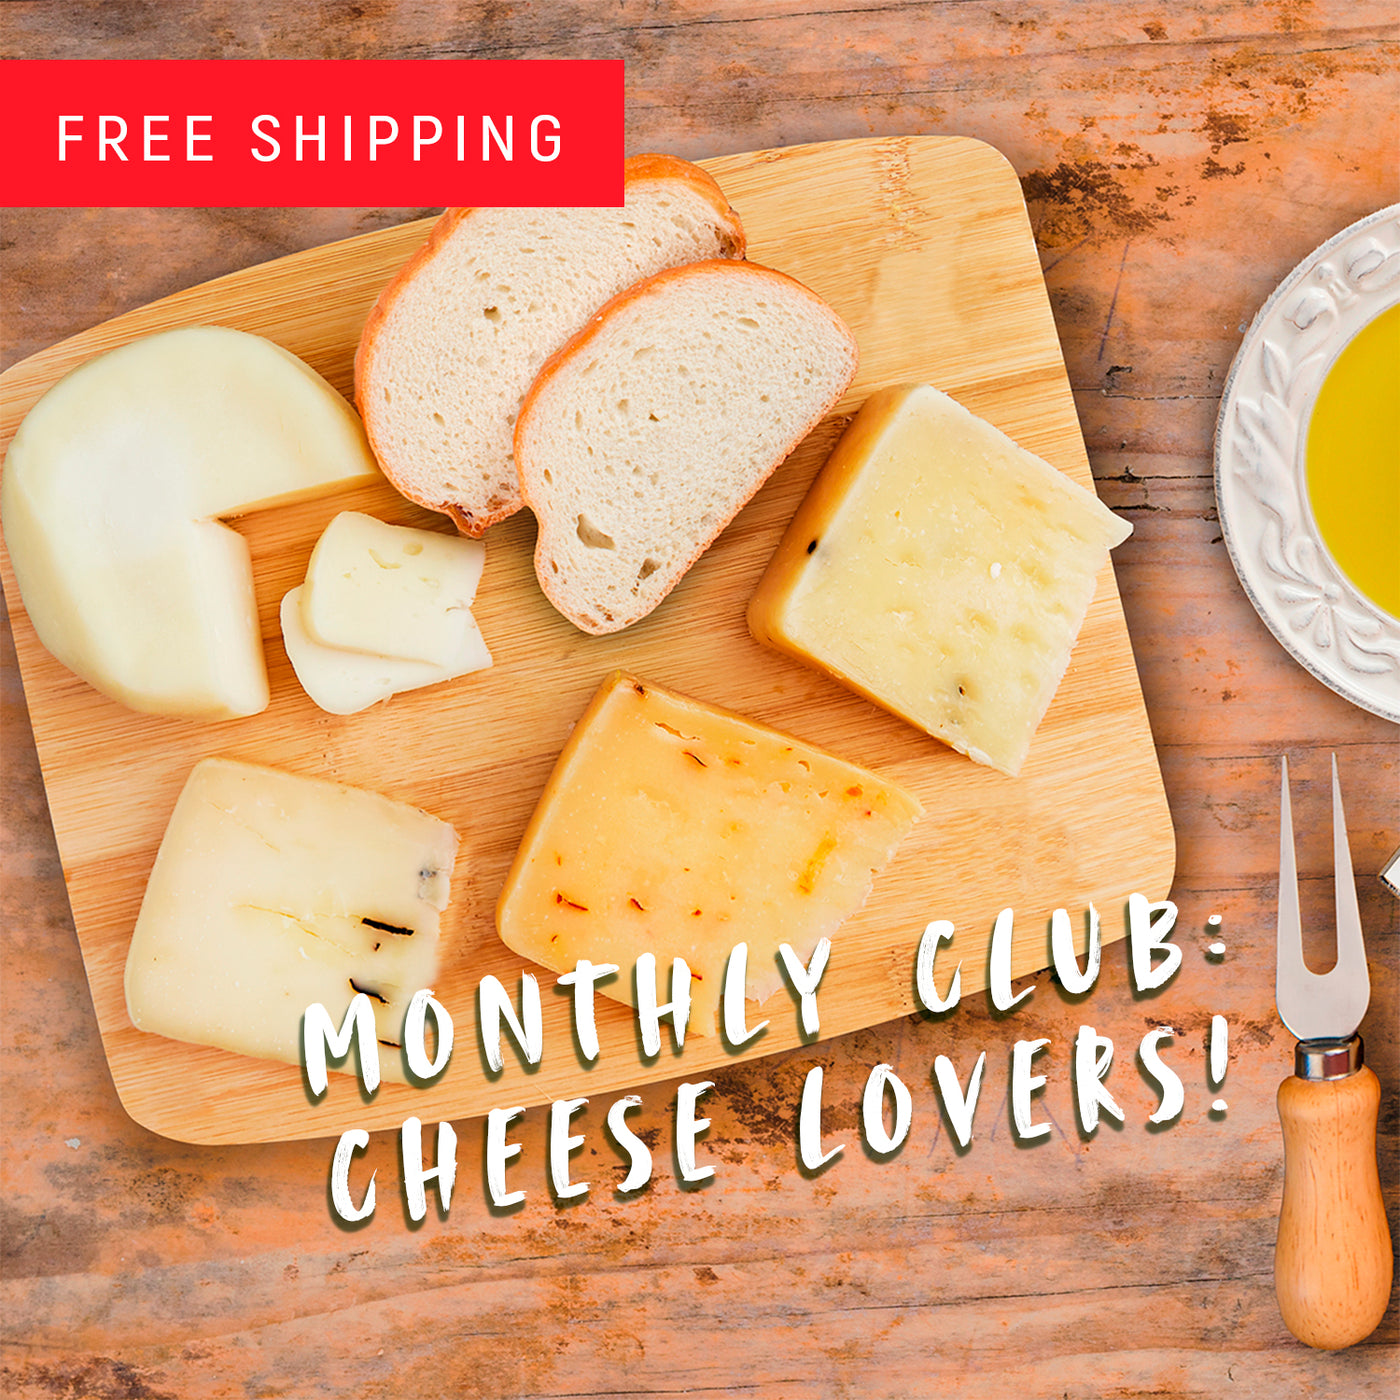 Monthly Club: Cheese Lovers!